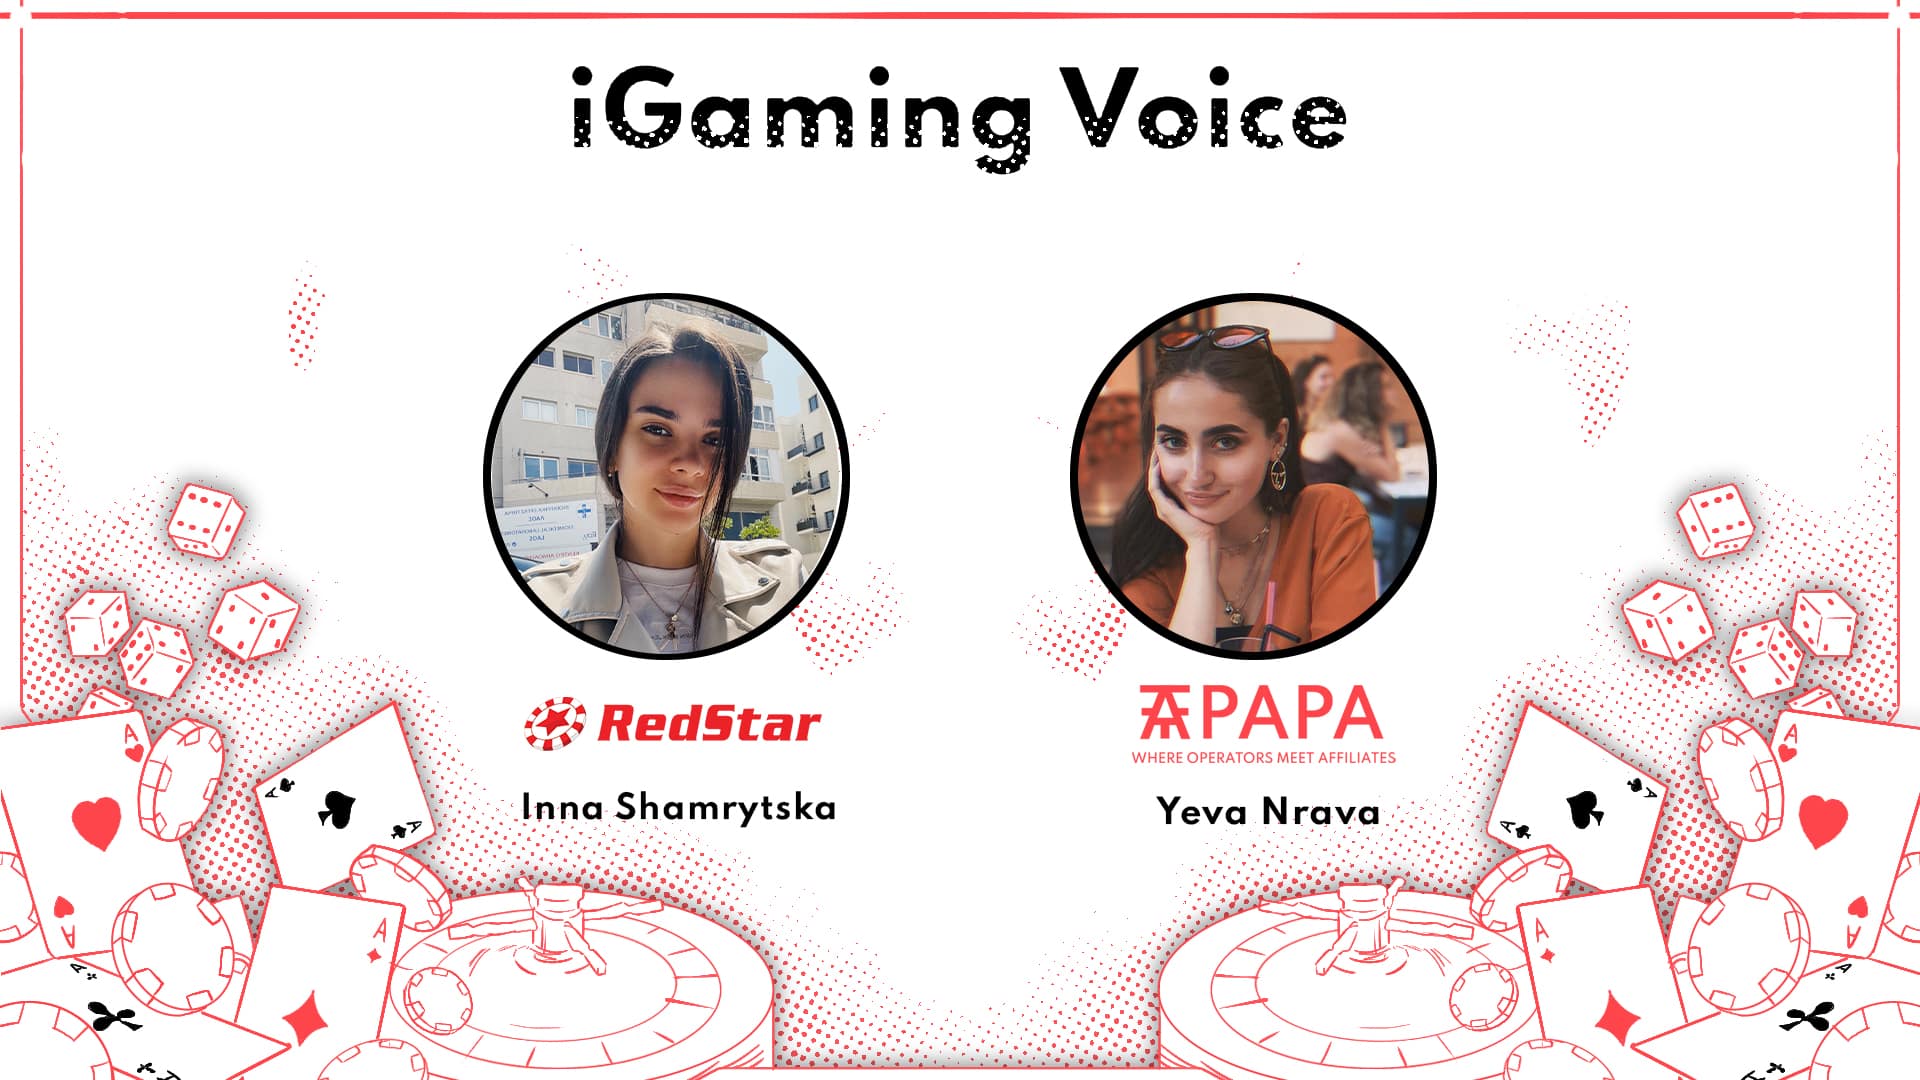 RedStar – iGaming Voice by Yeva